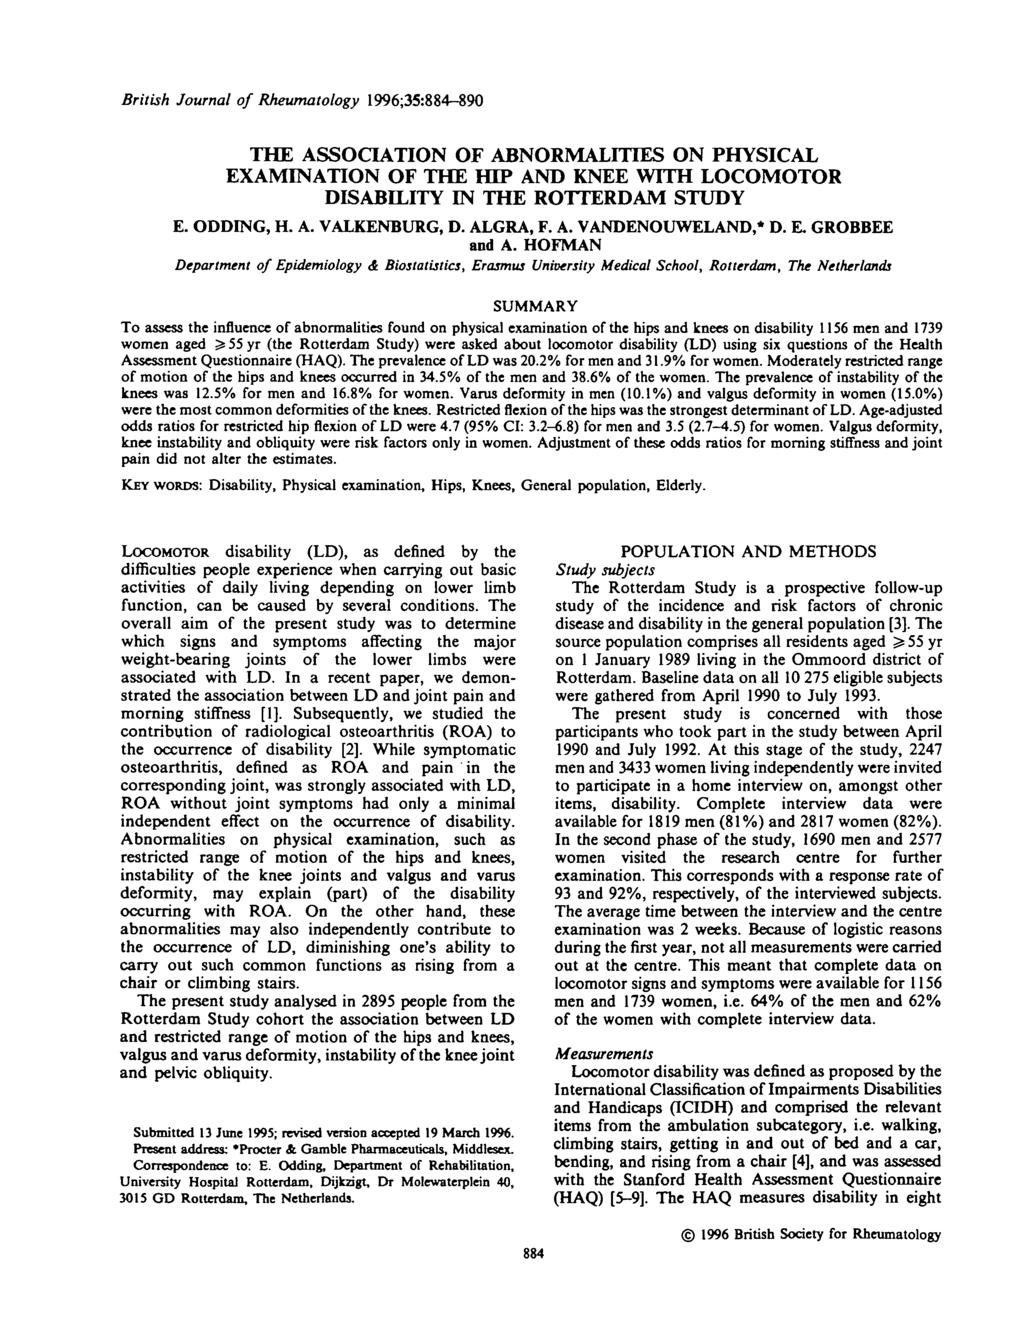 British Journal of Rheumatology 1996;35:884-890 THE ASSOCIATION OF ABNORMALITIES ON PHYSICAL EXAMINATION OF THE HIP AND KNEE WITH LOCOMOTOR DISABILITY IN THE ROTTERDAM STUDY E. ODDING, H. A. VALKENBURG, D.